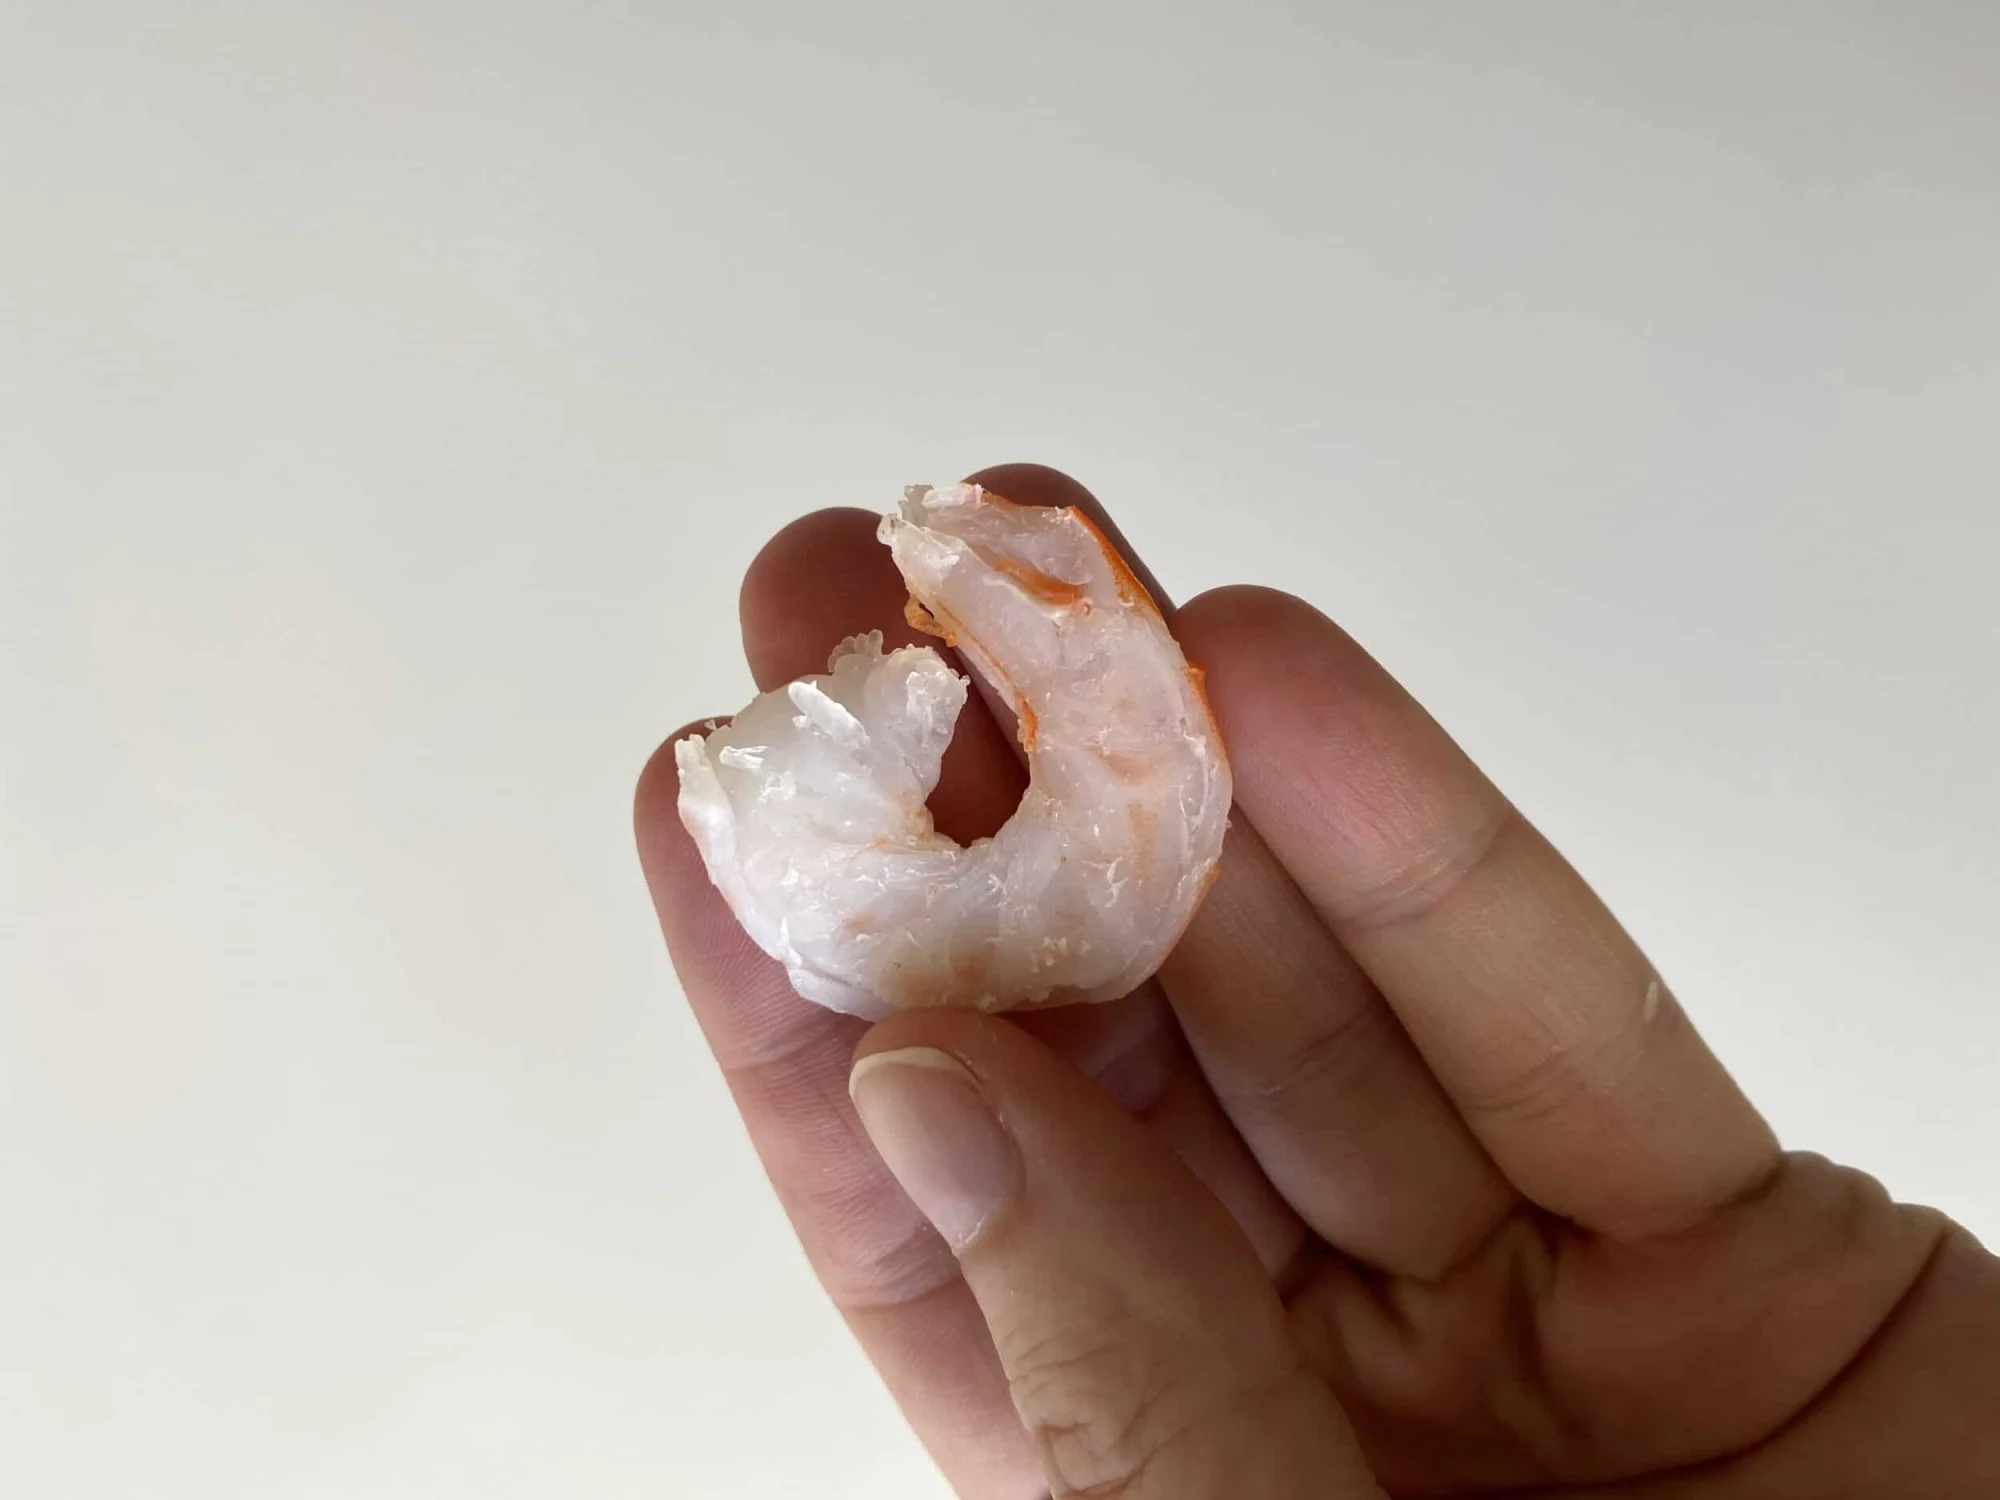 a whole shrimp cut in half lengthwise